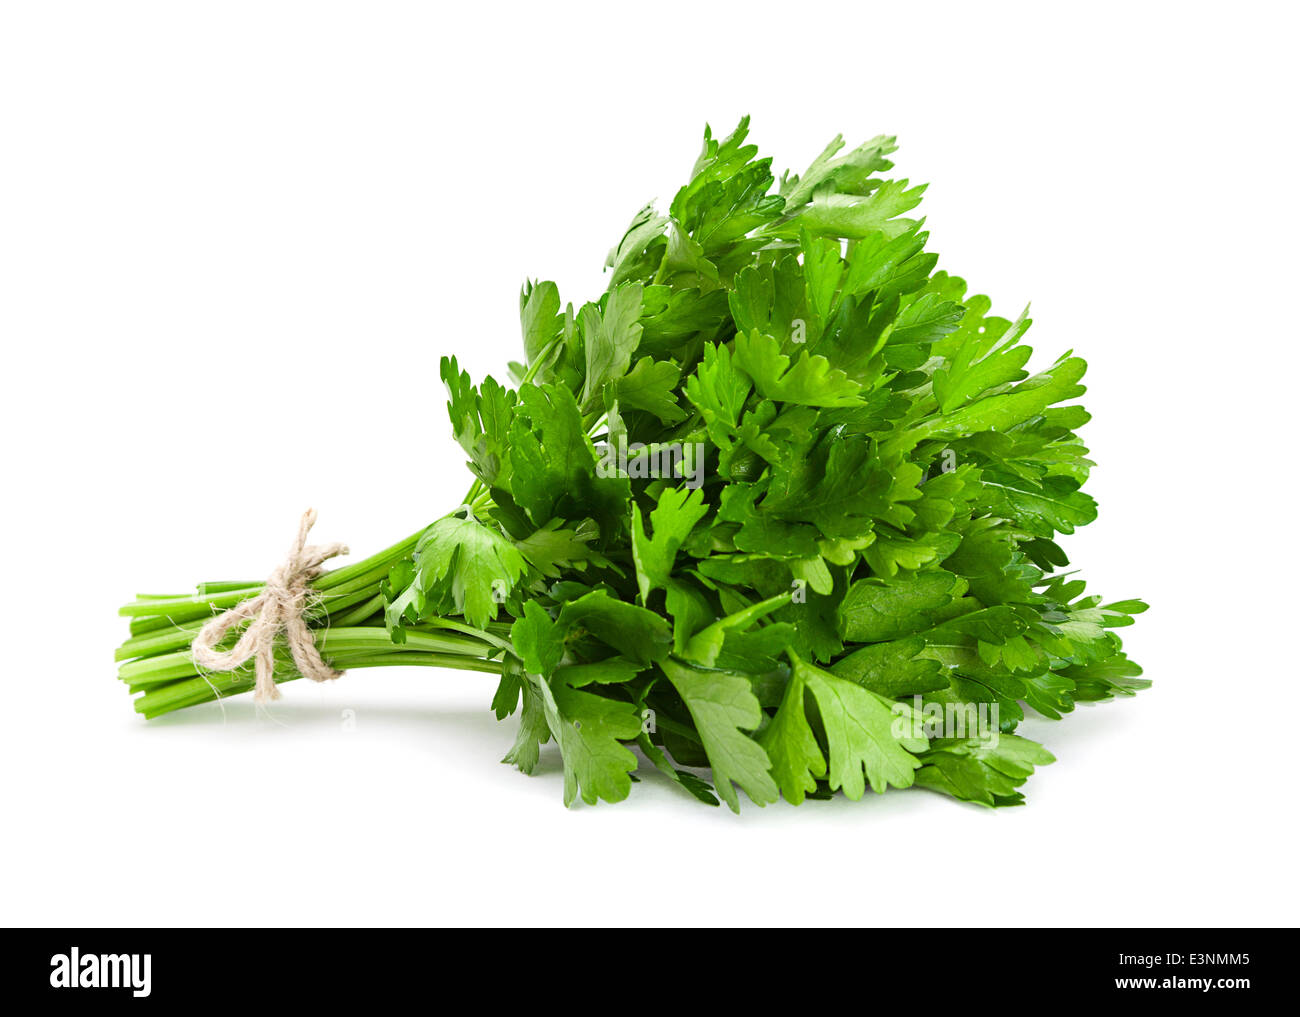 Parsley aromatic herb isolated on white Stock Photo